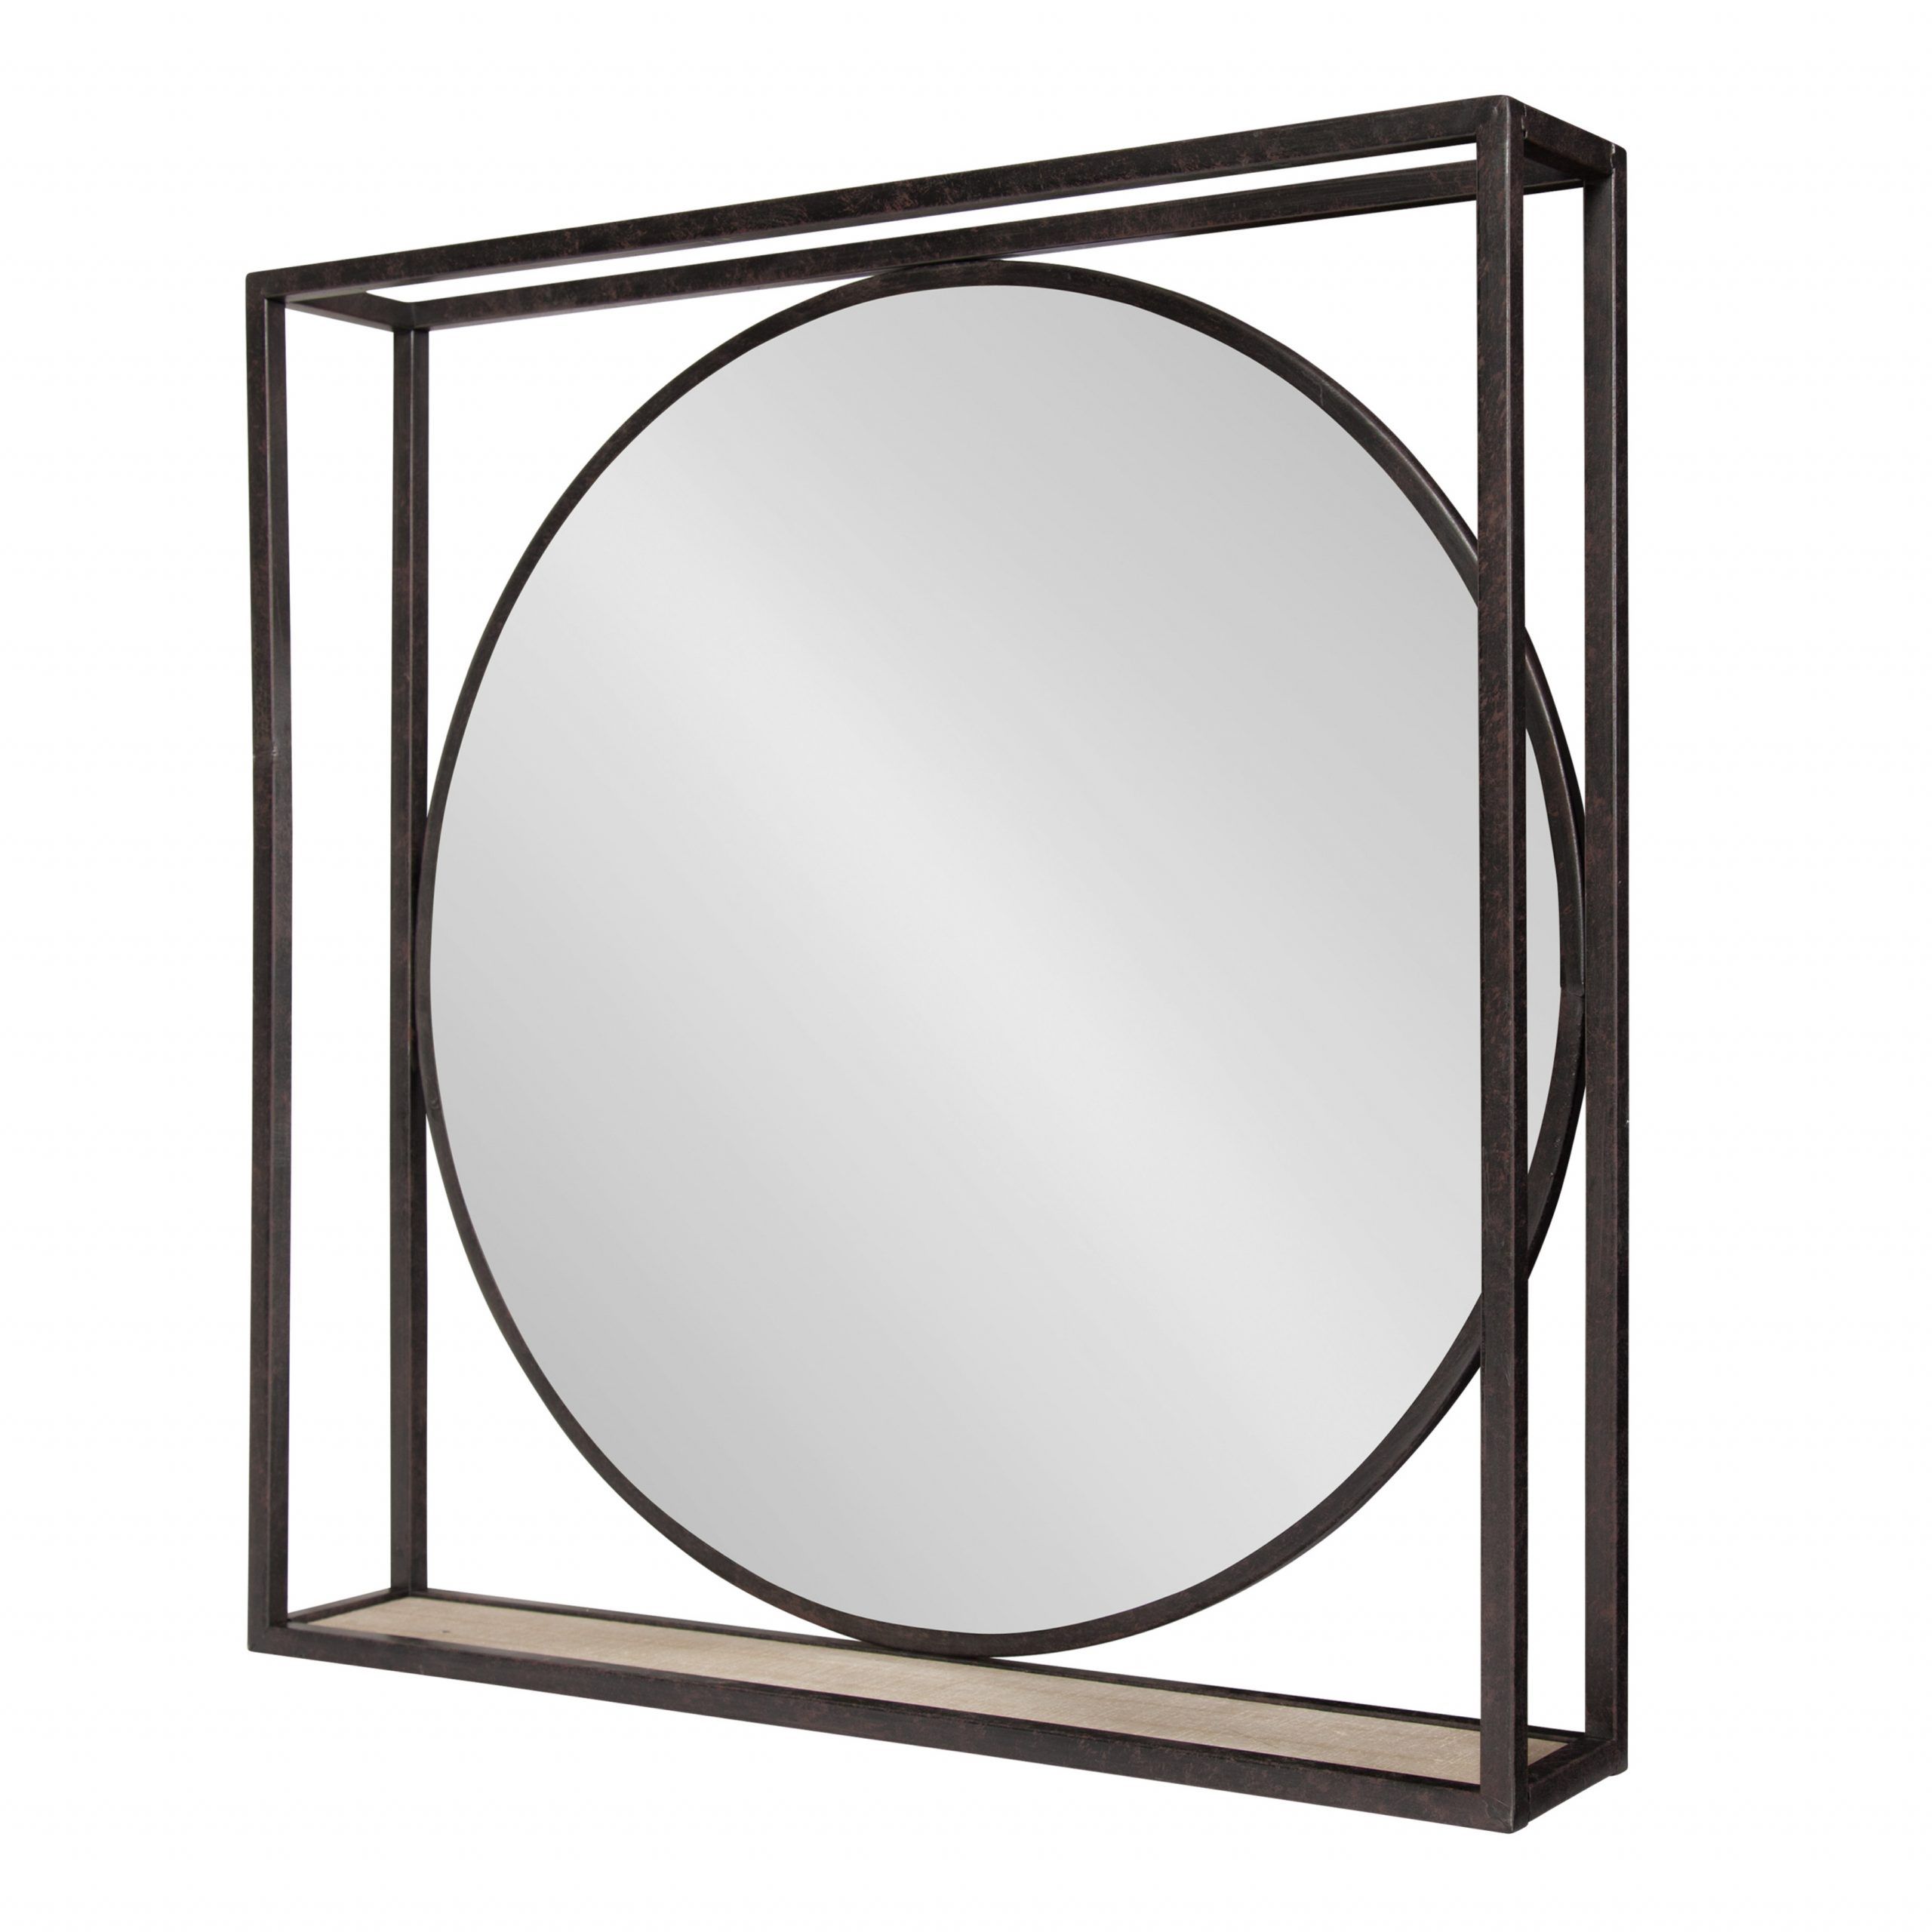 Kate And Laurel Mccauley Decorative Rustic Modern Round Vanity Mirror Throughout Most Recent Square Bronze Metal Wall Art (View 12 of 15)